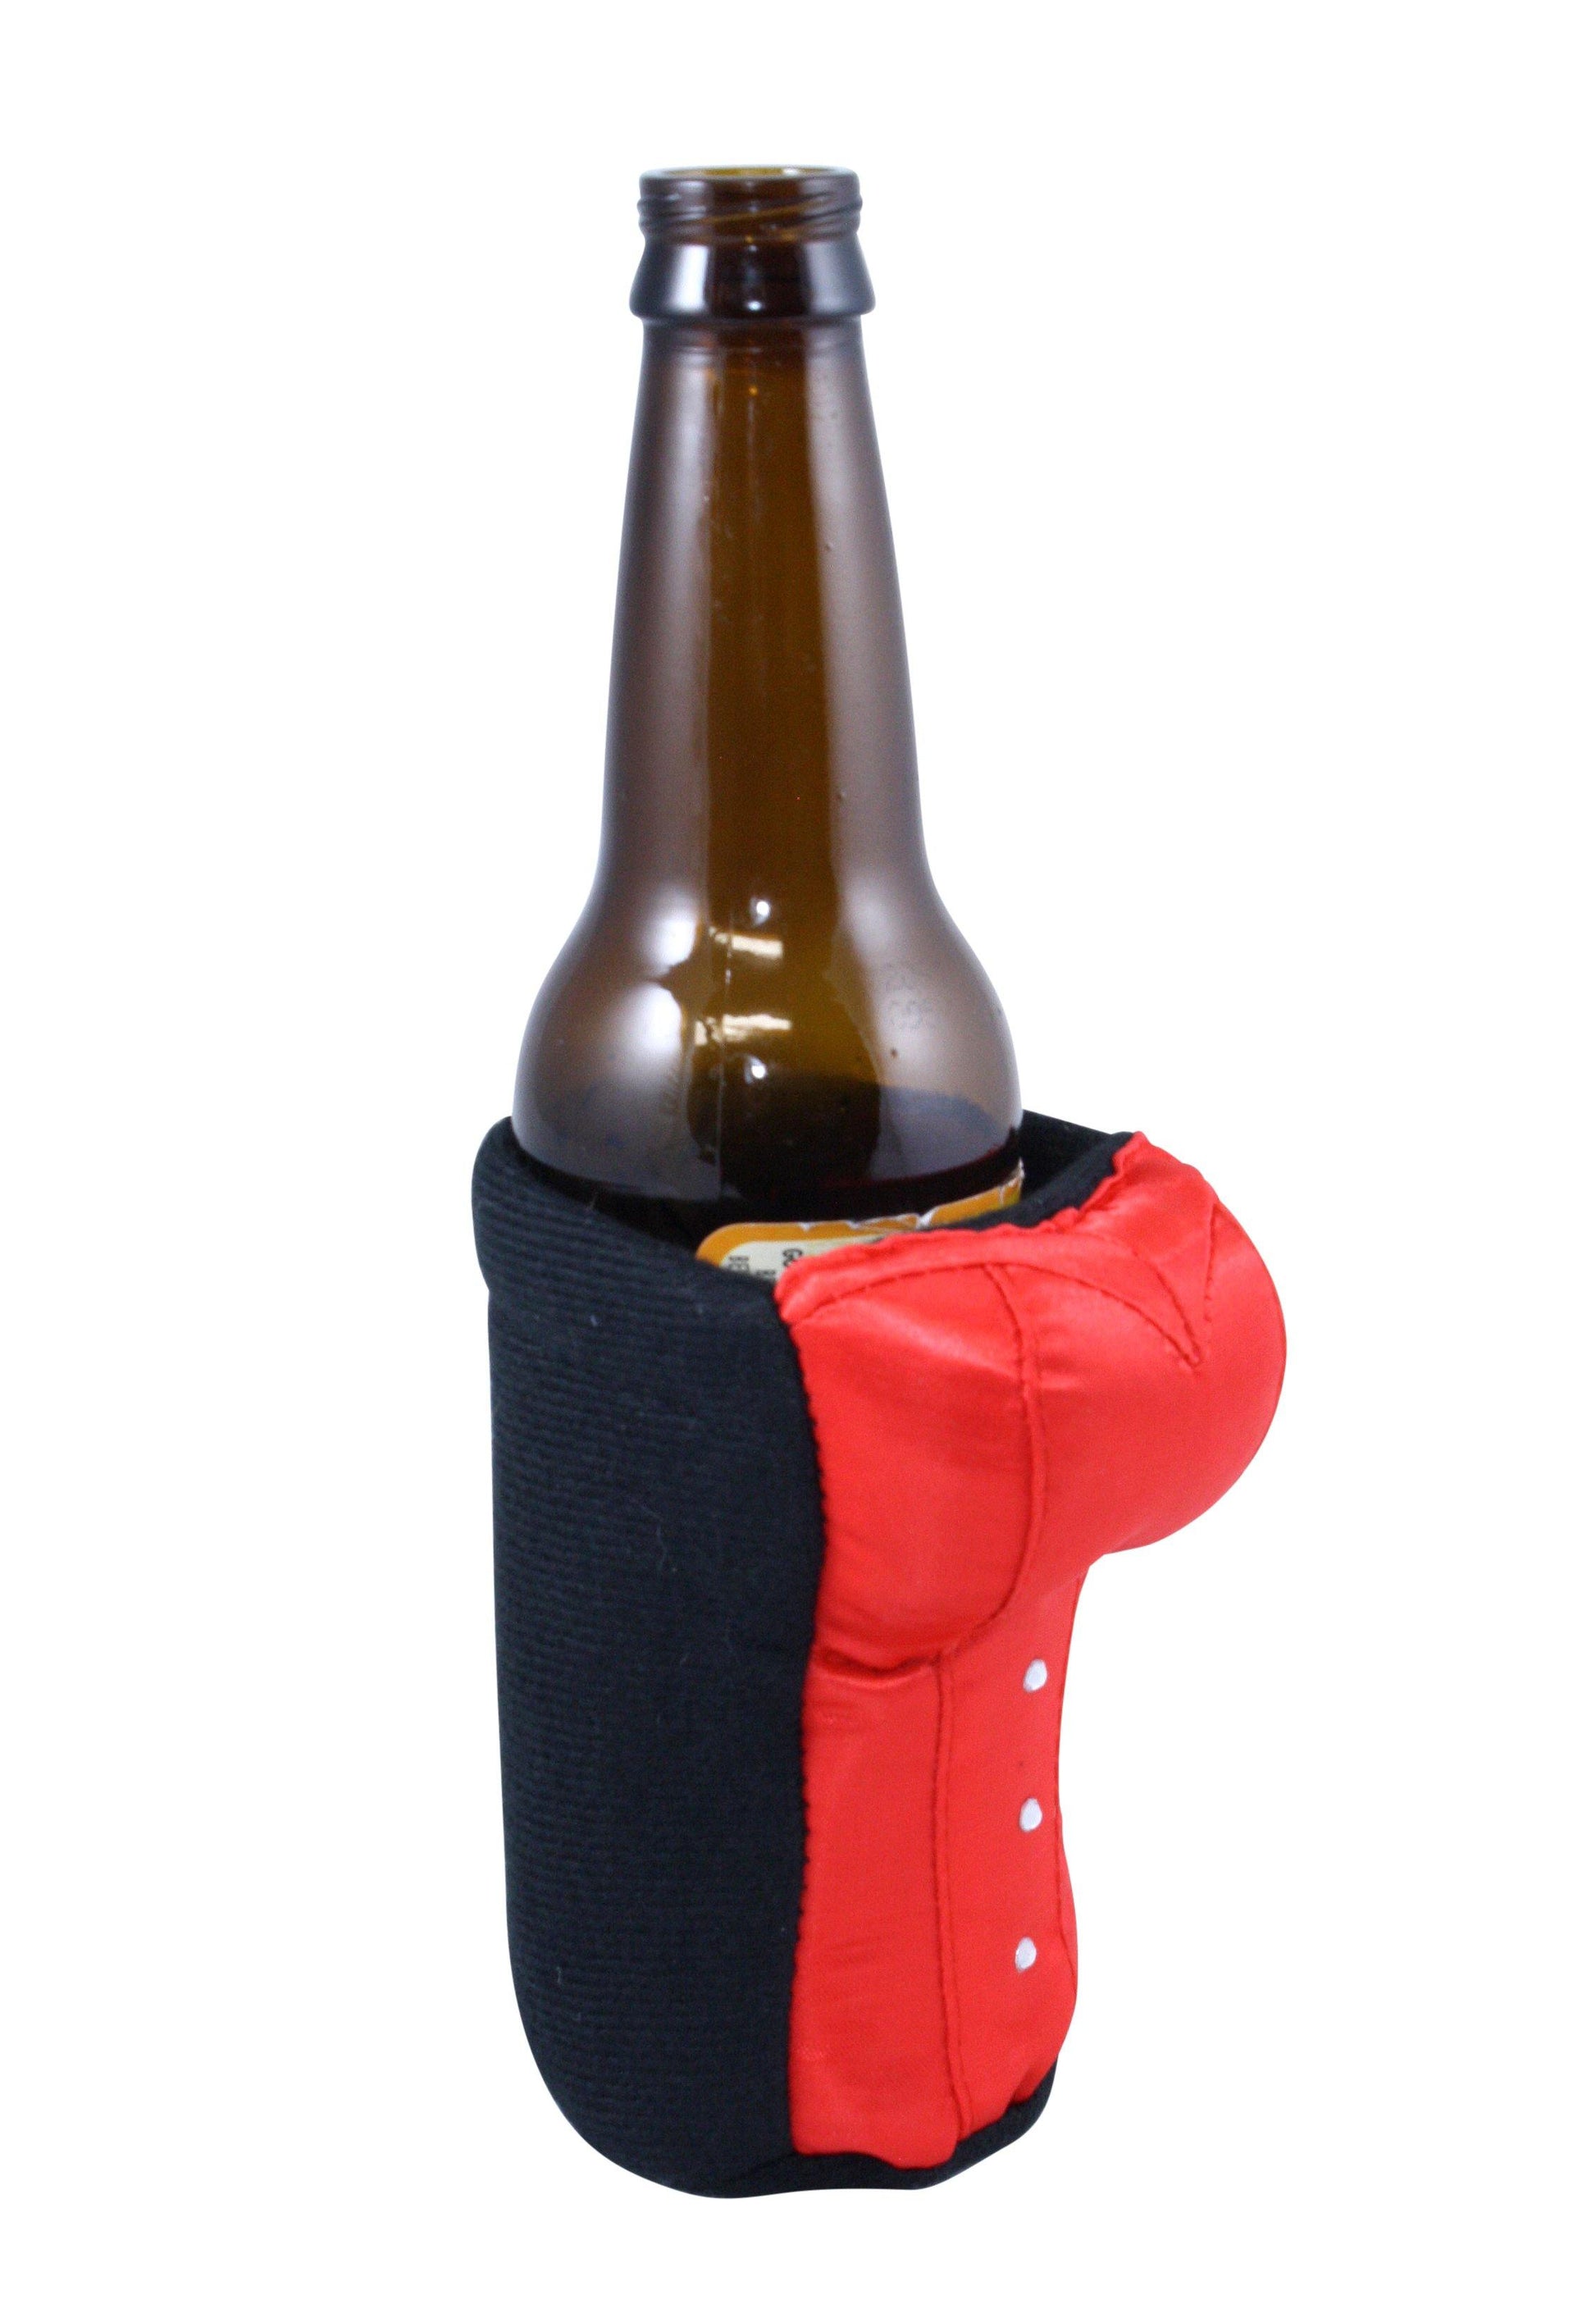 Unique Koozie for Beer Lovers - Corset Coosie by Tipsy Totes 